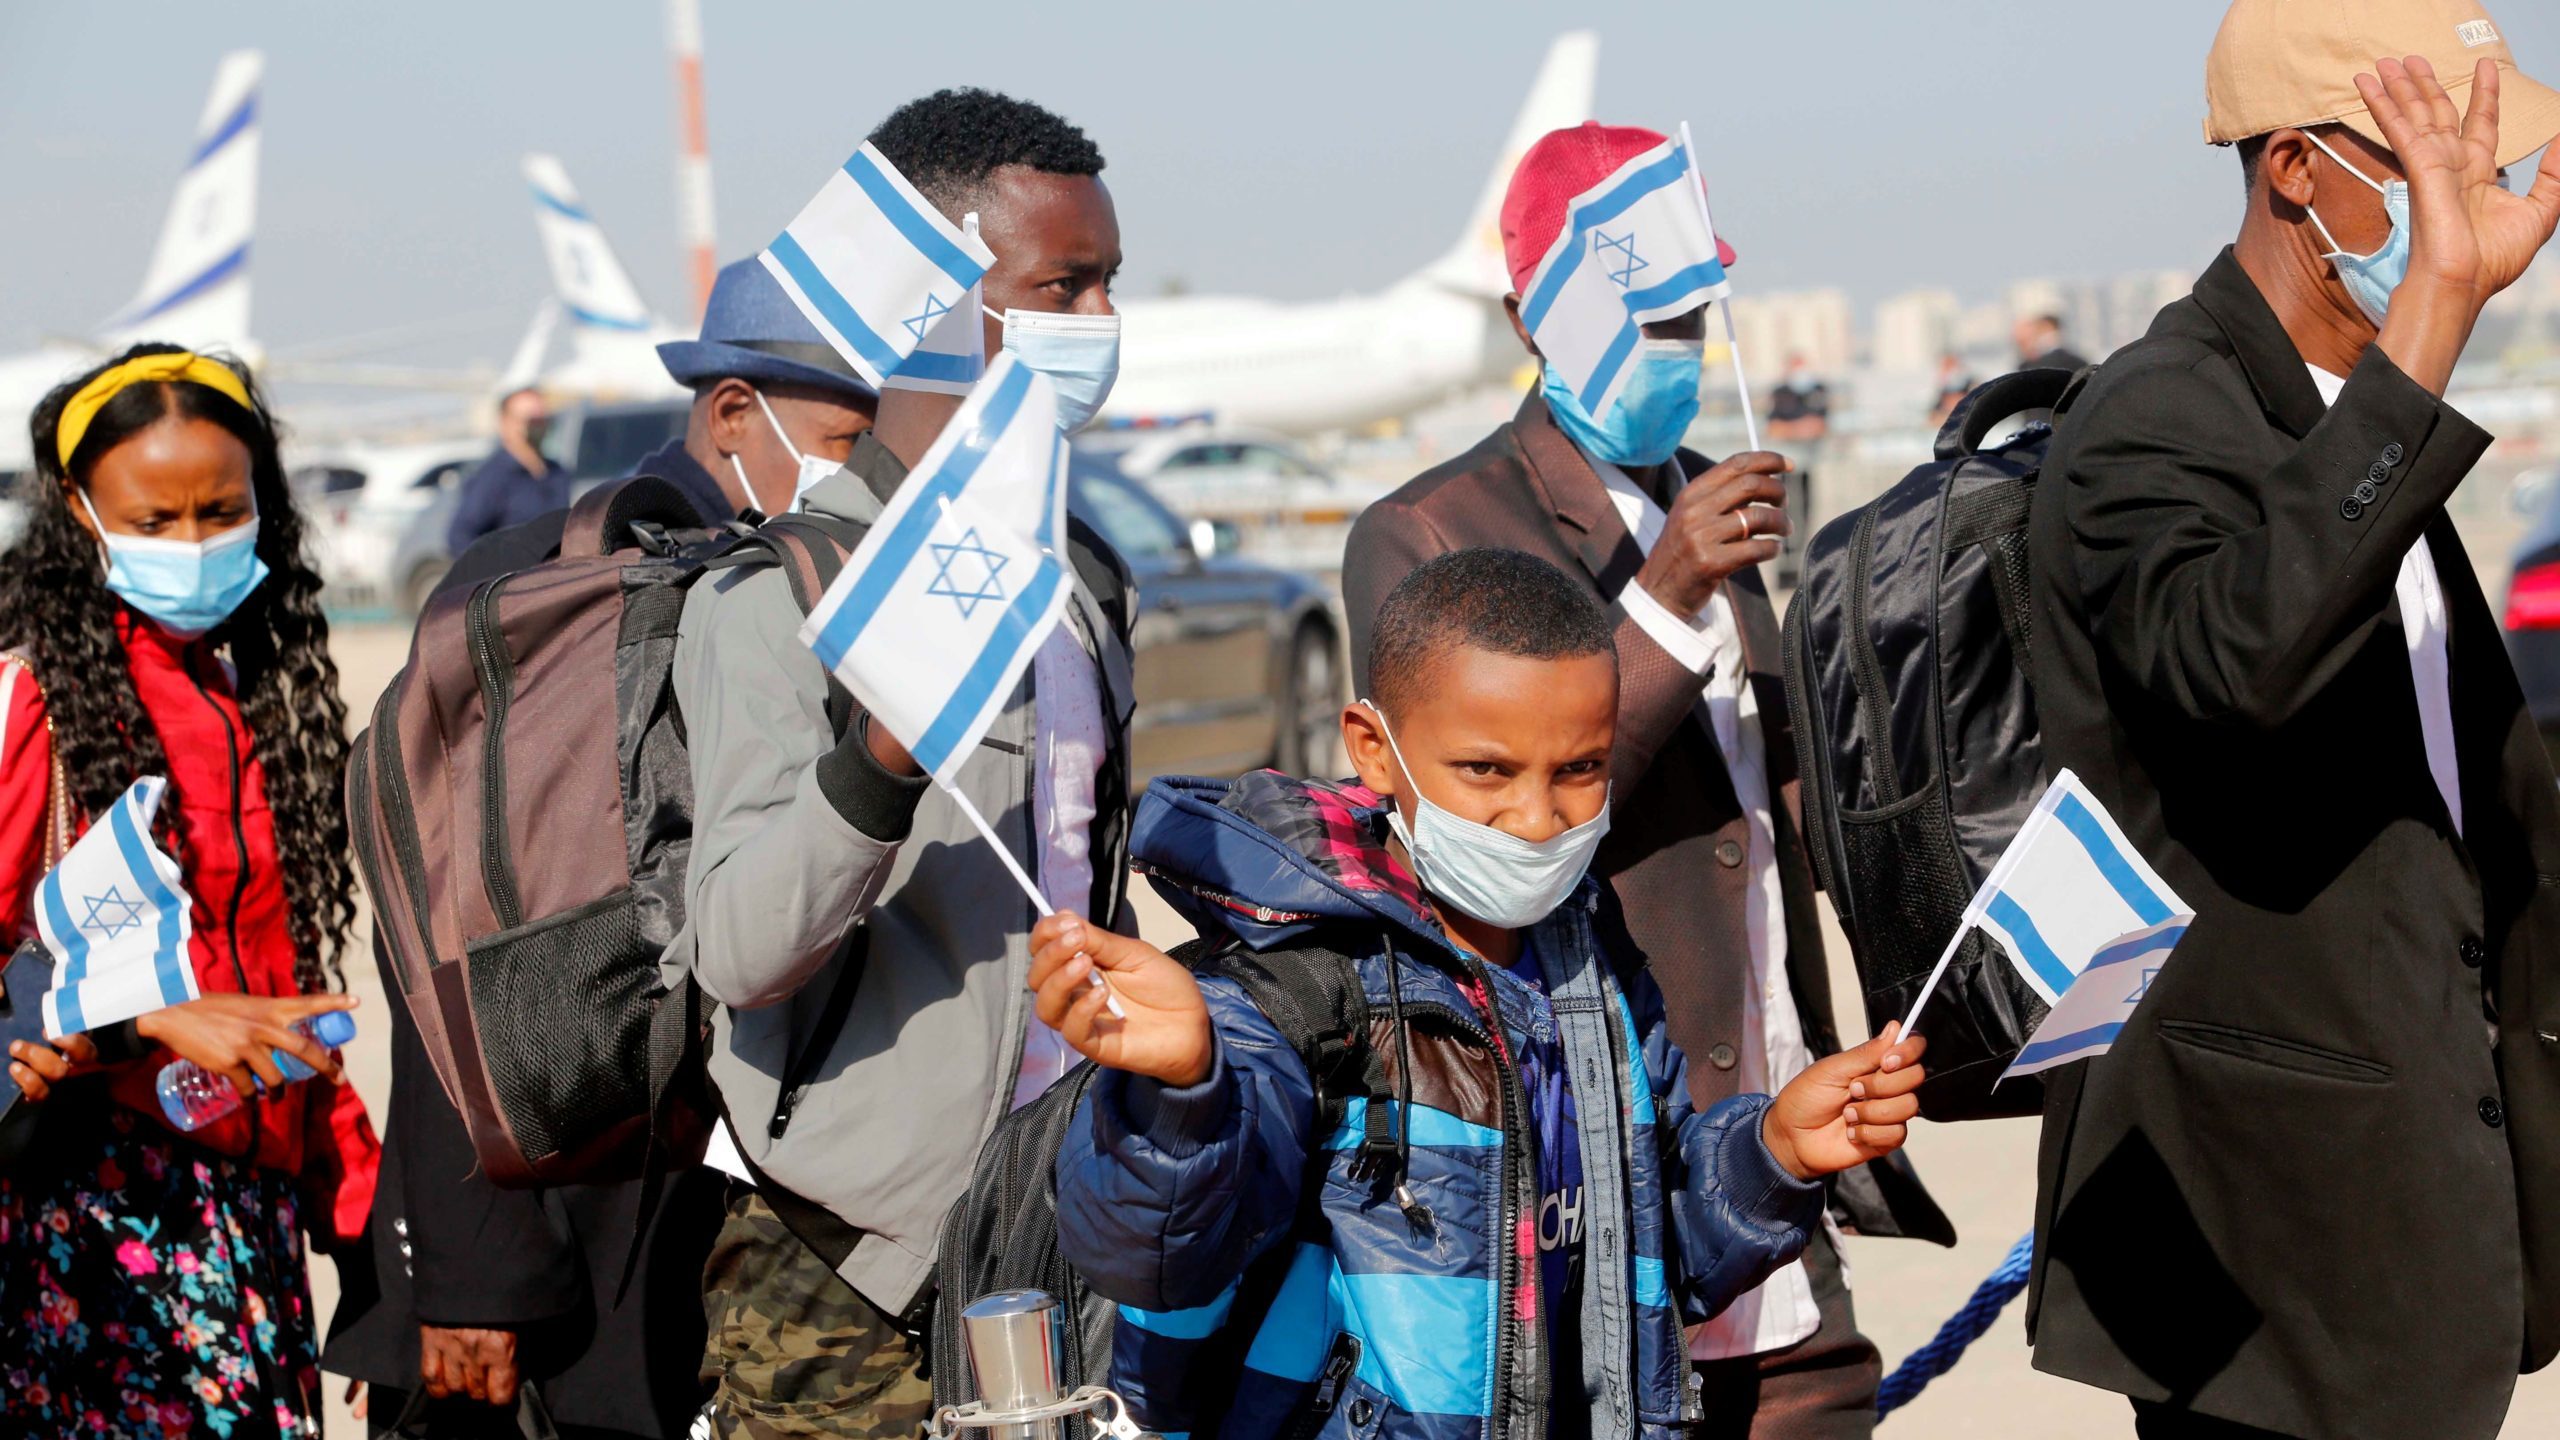 Ethiopians Immigrating to Israel Face Many Obstacles; Christians, Jews Unite to Assist